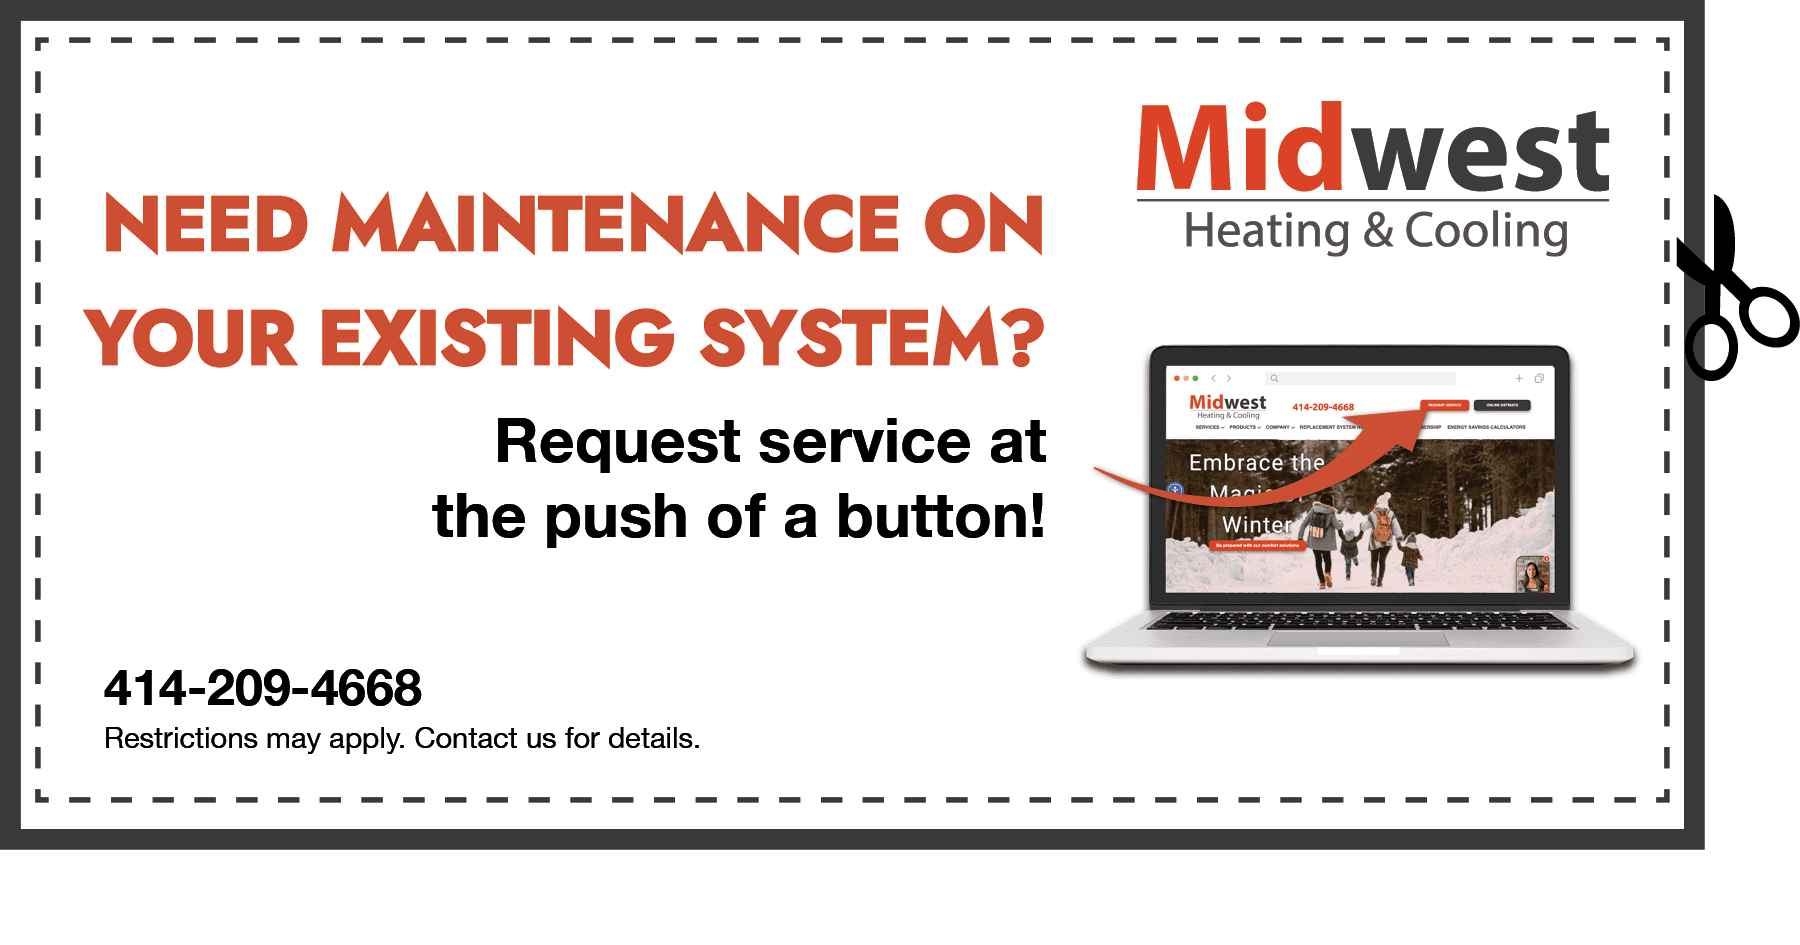 Need maintenance on your existing system? request service at the push of a button.